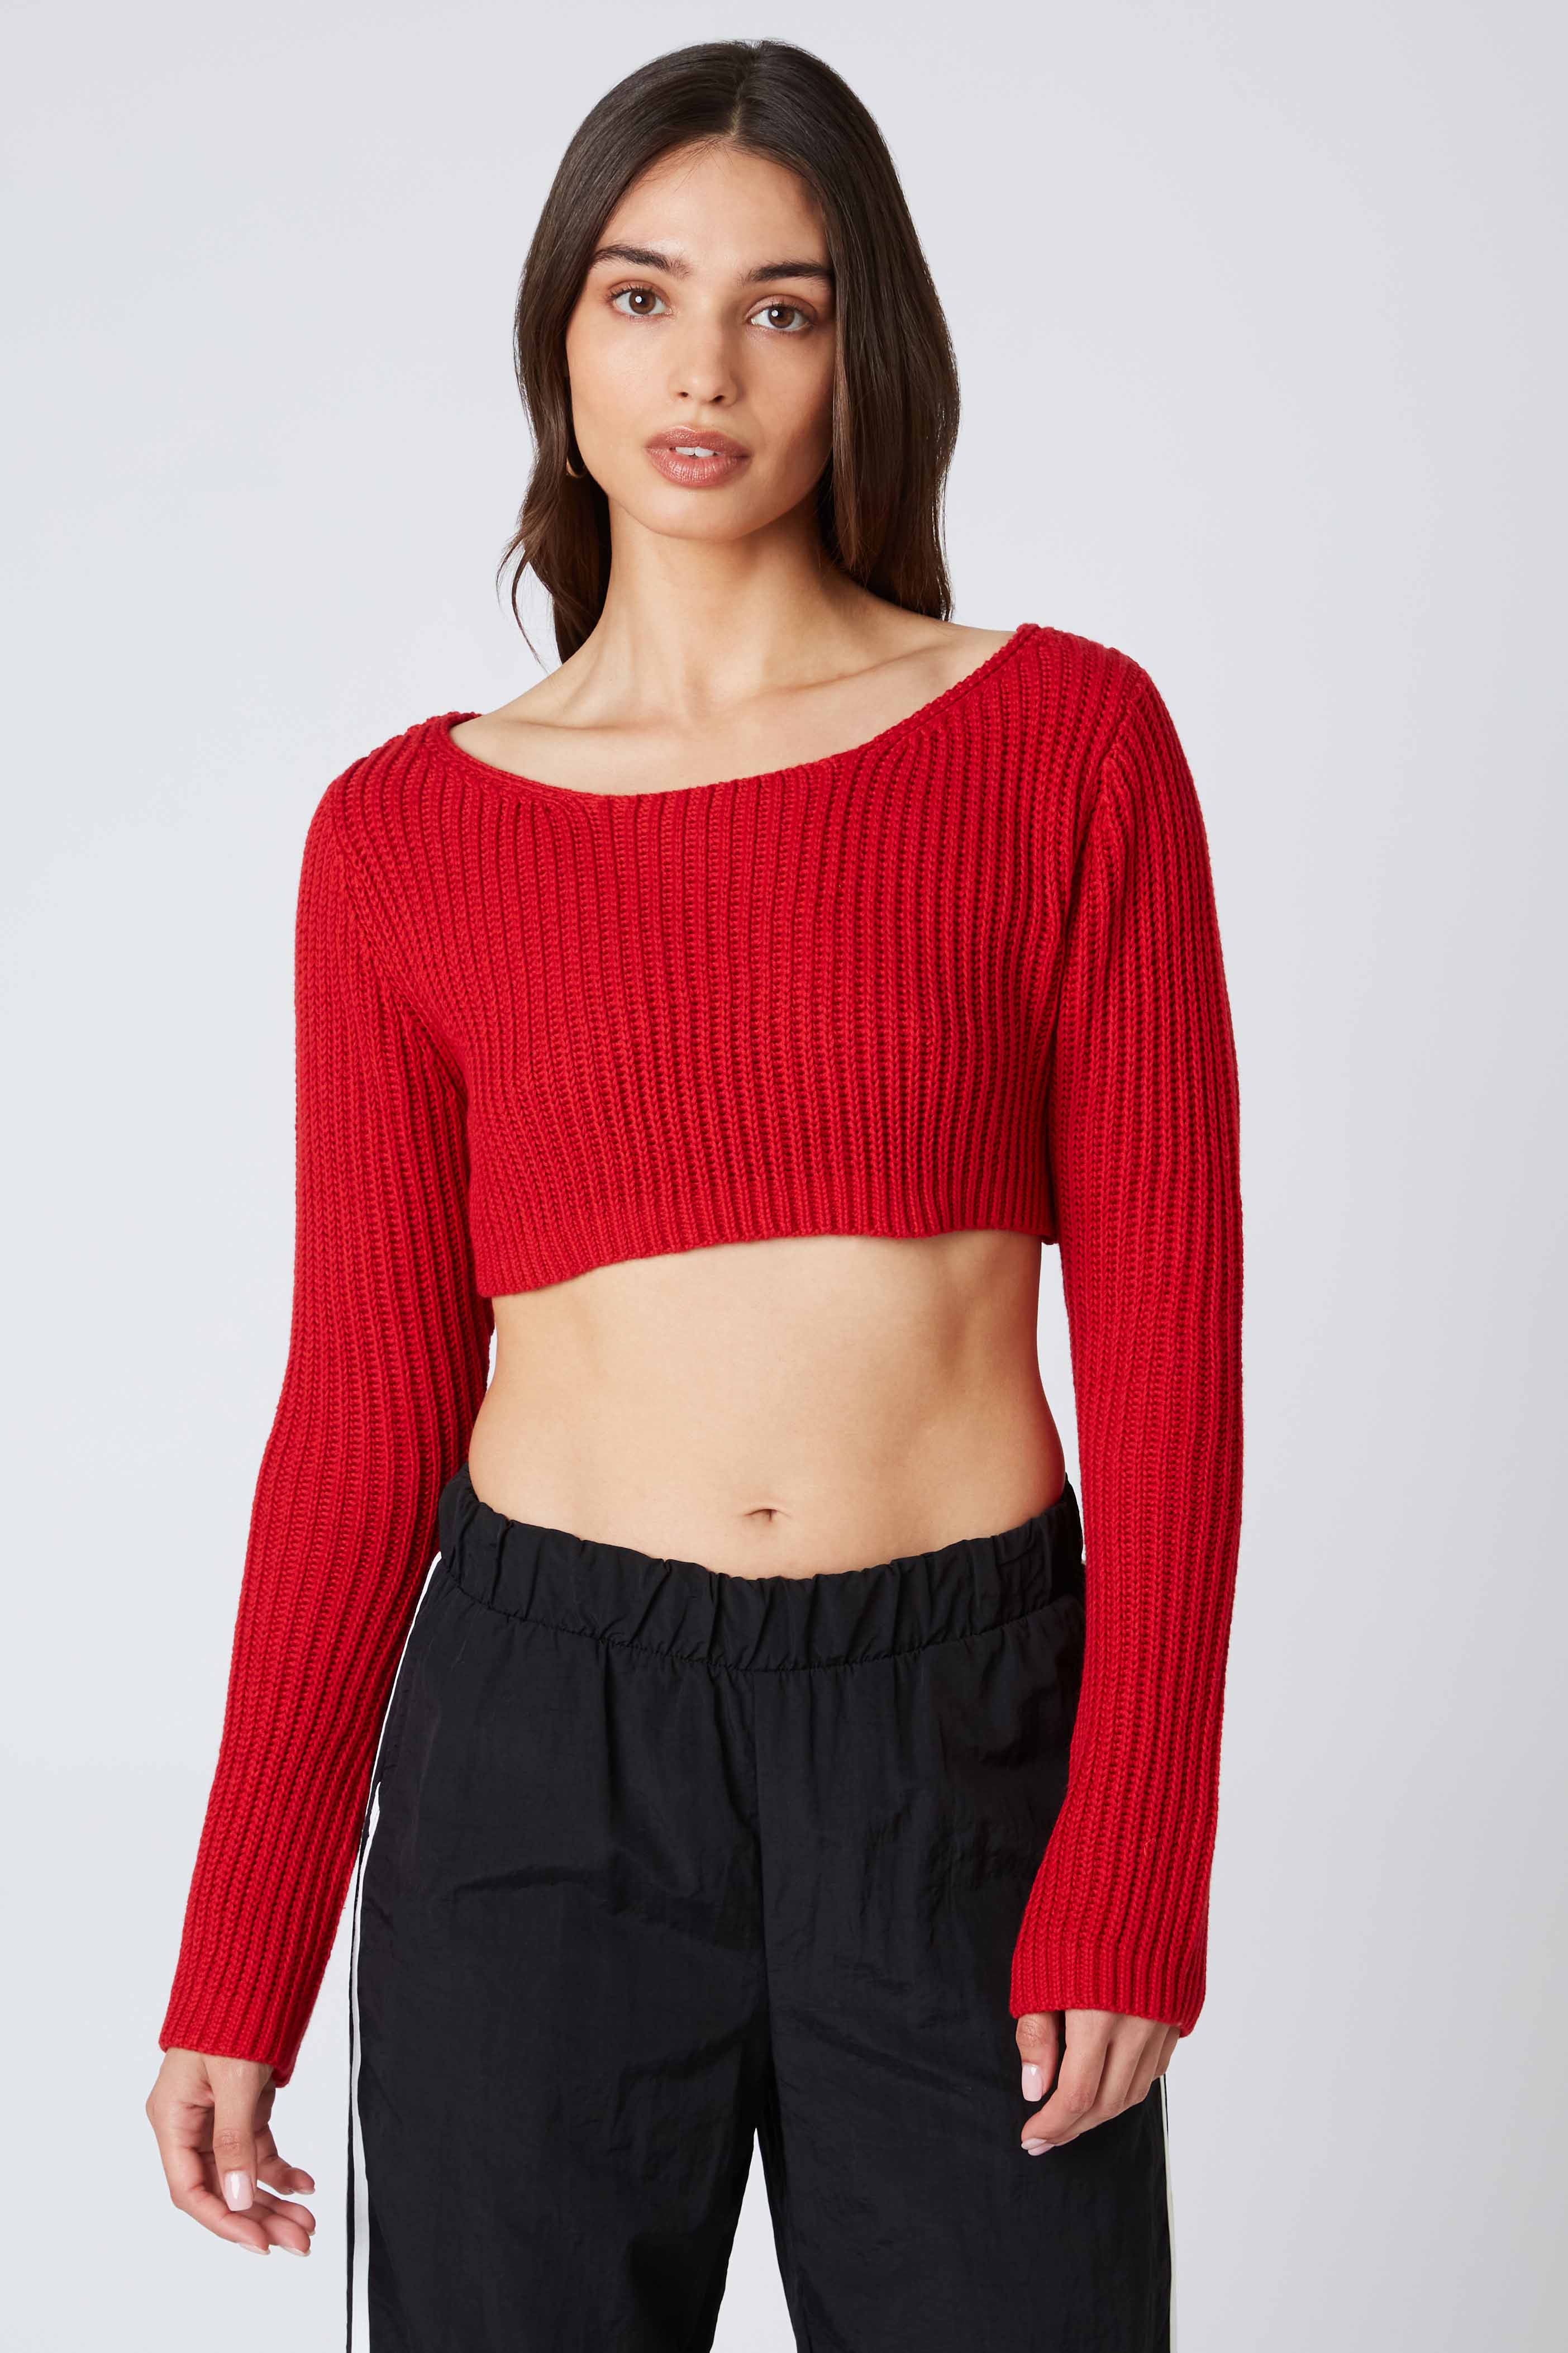 Knit Cropped Sweater Top in Red Front View